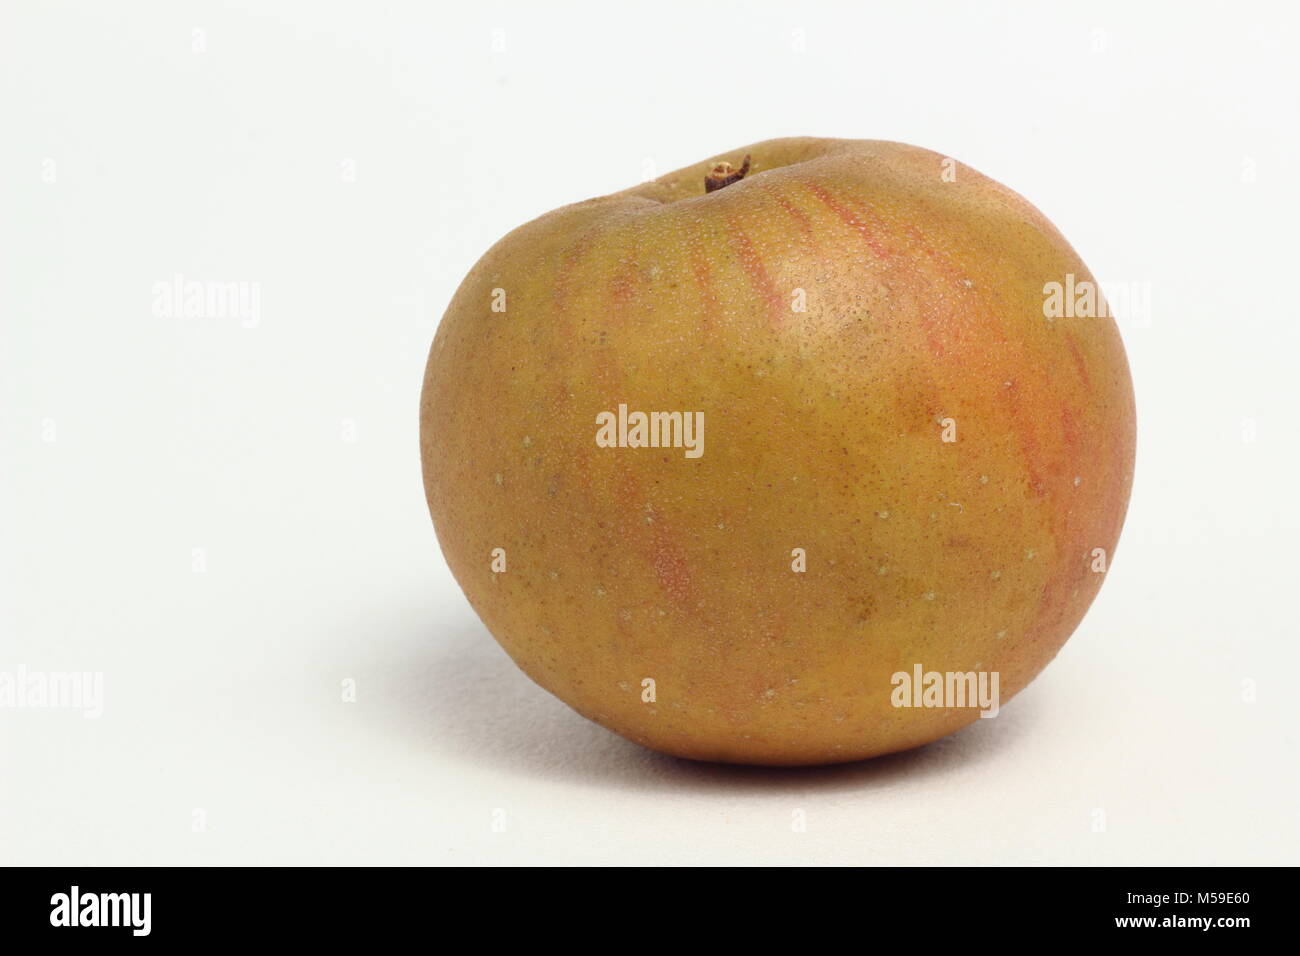 Malus domestica 'Egremont Russet', an heirloom English apple variety, white background, UK Stock Photo